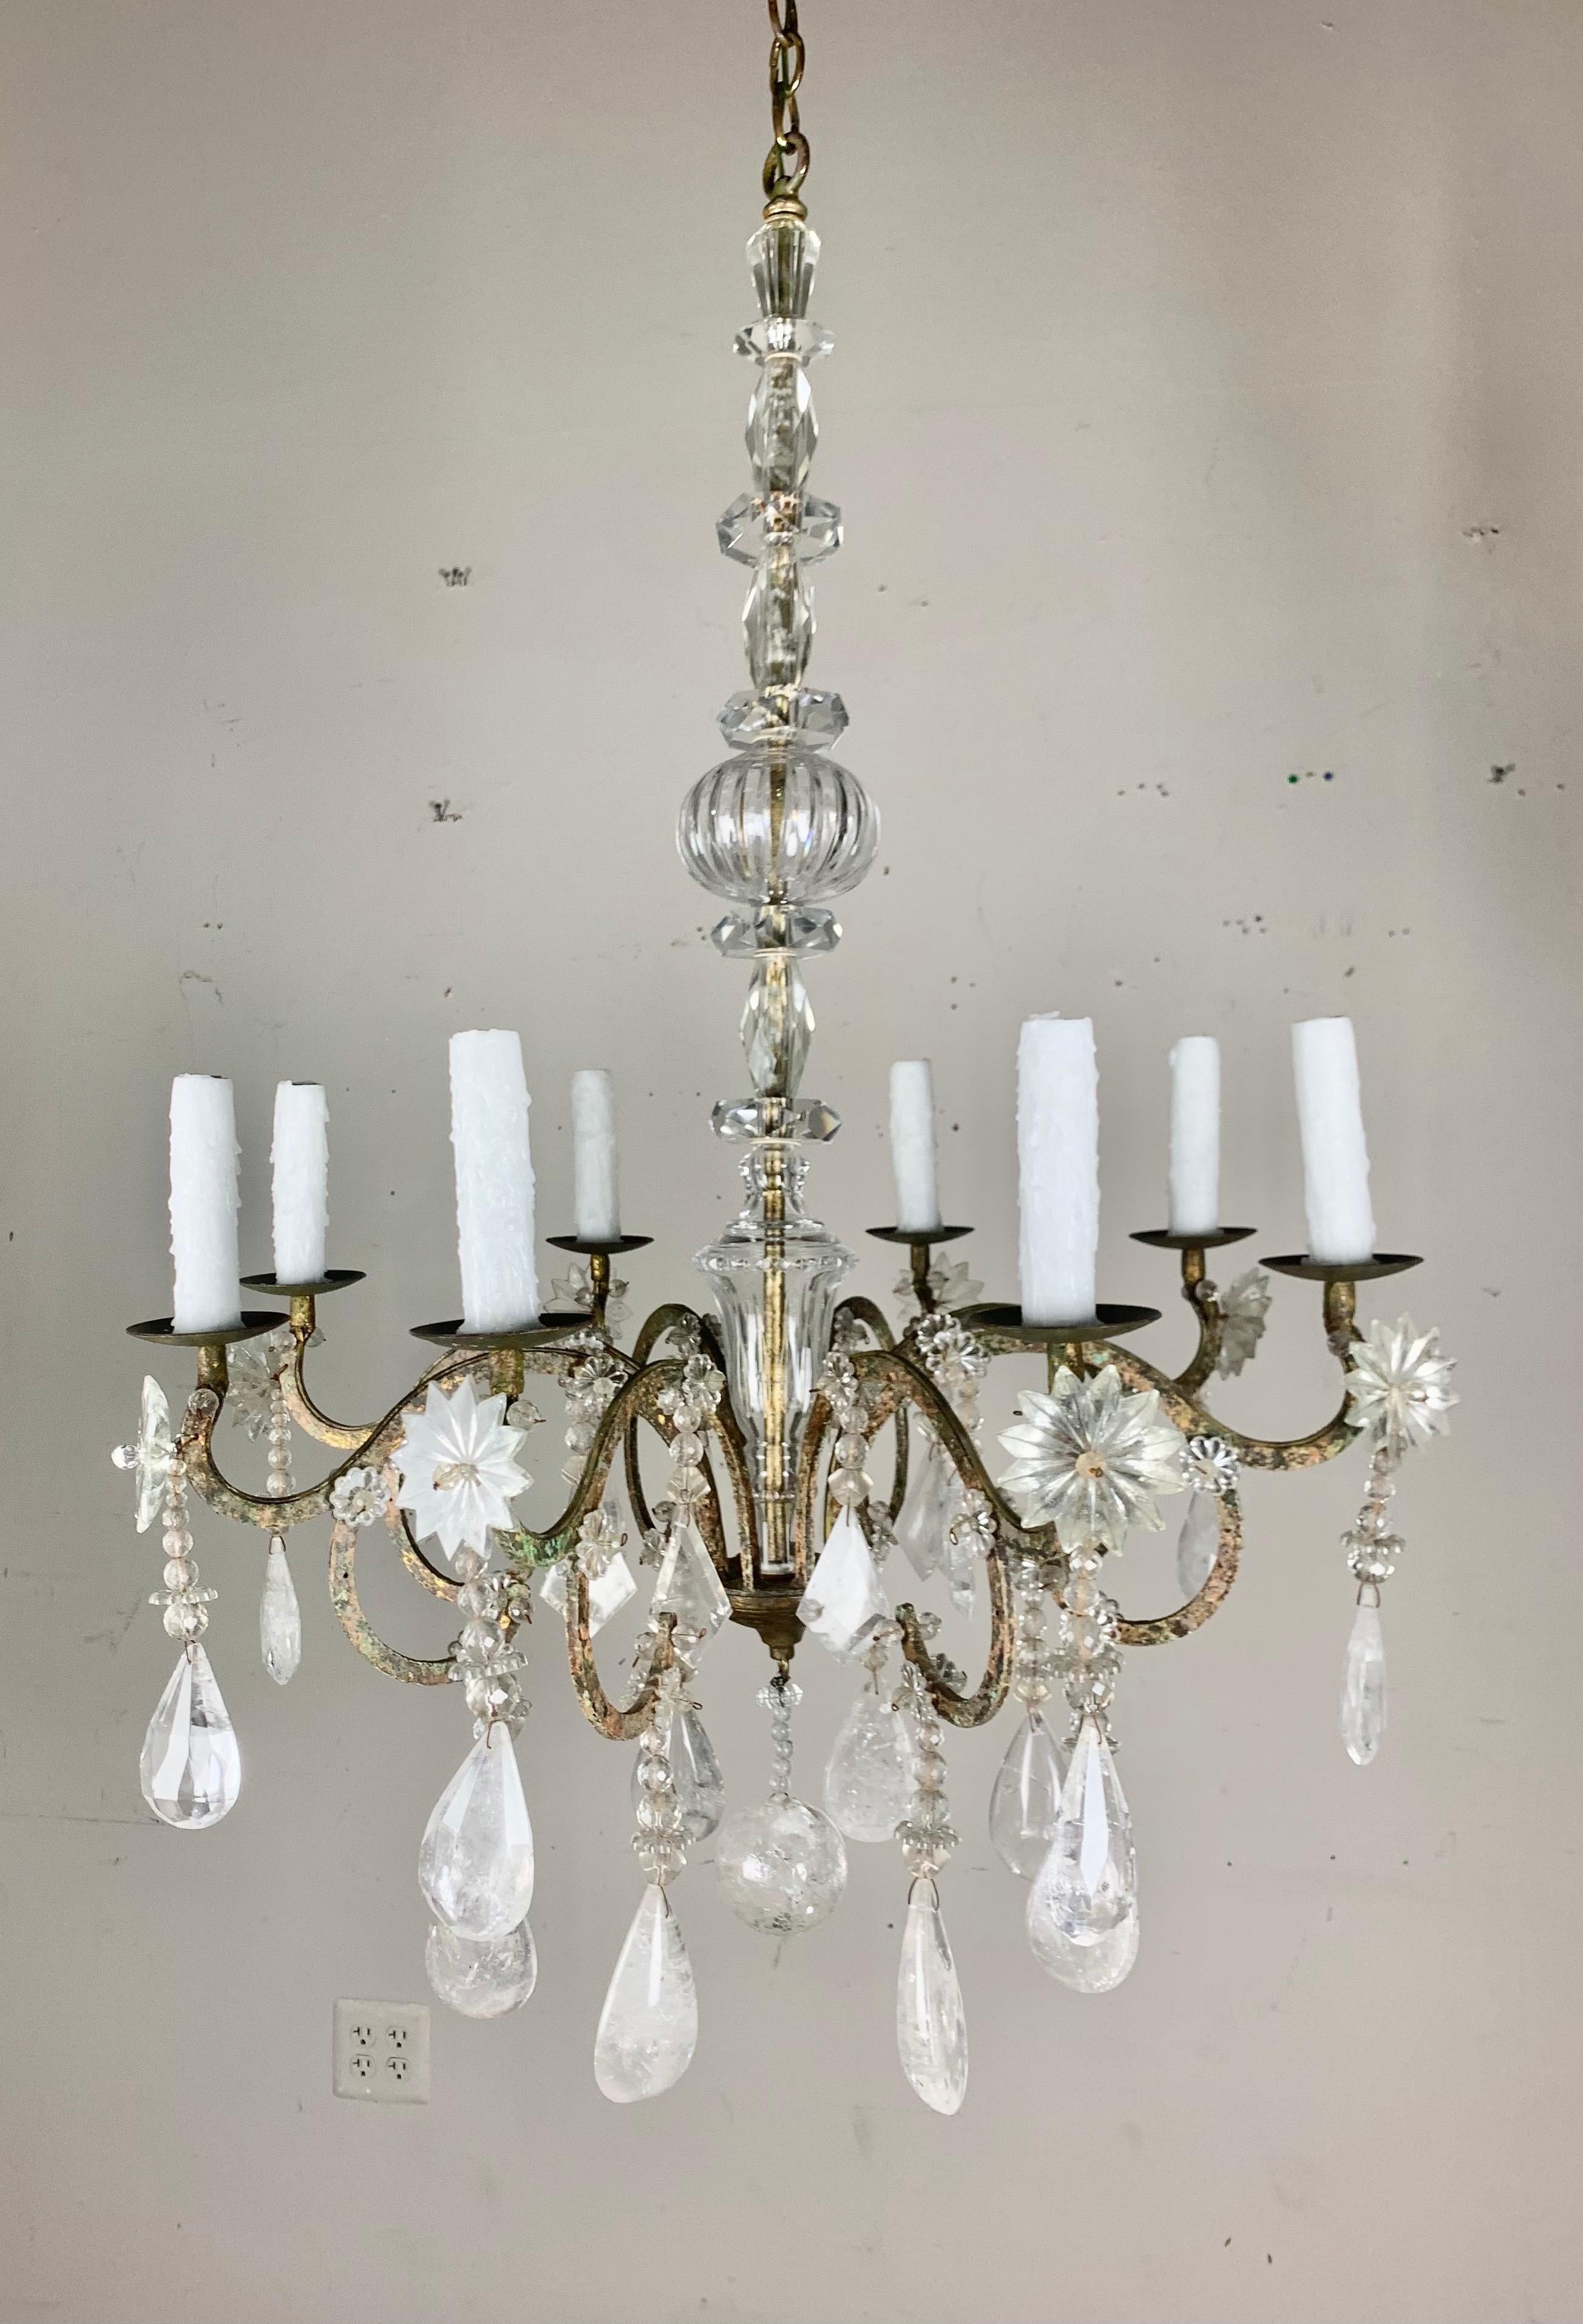 Mid-20th Century Eight Light Rock Crystal Chandelier C. 1930's For Sale